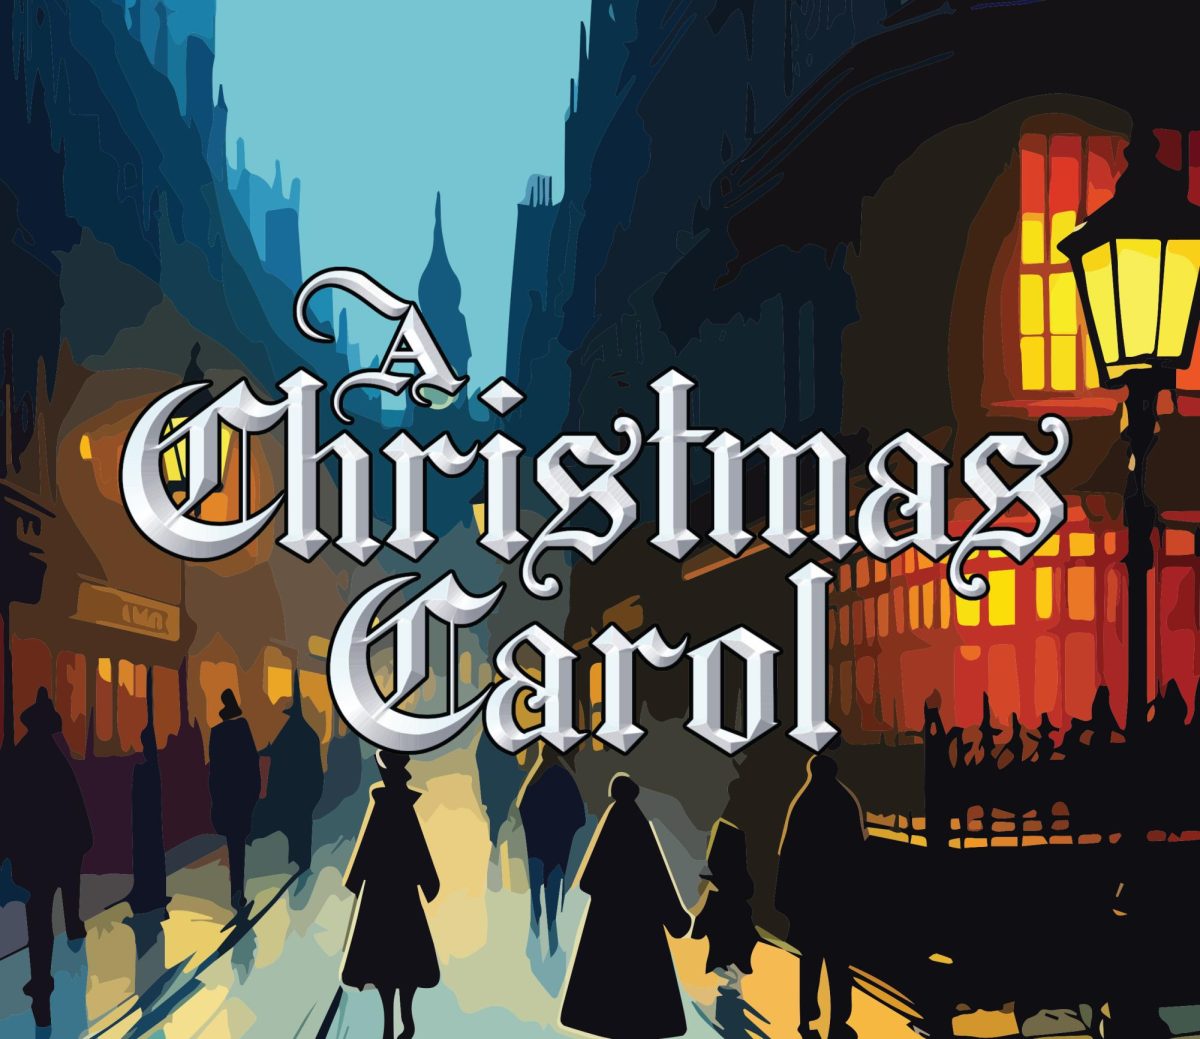 SRJC+Theatre+Arts+Department+Chair+James+Newman+has+always+wanted+to+produce+A+Christmas+Carol%2C+and+is+excited+to+present+this+classic+story+in+musical+form.+